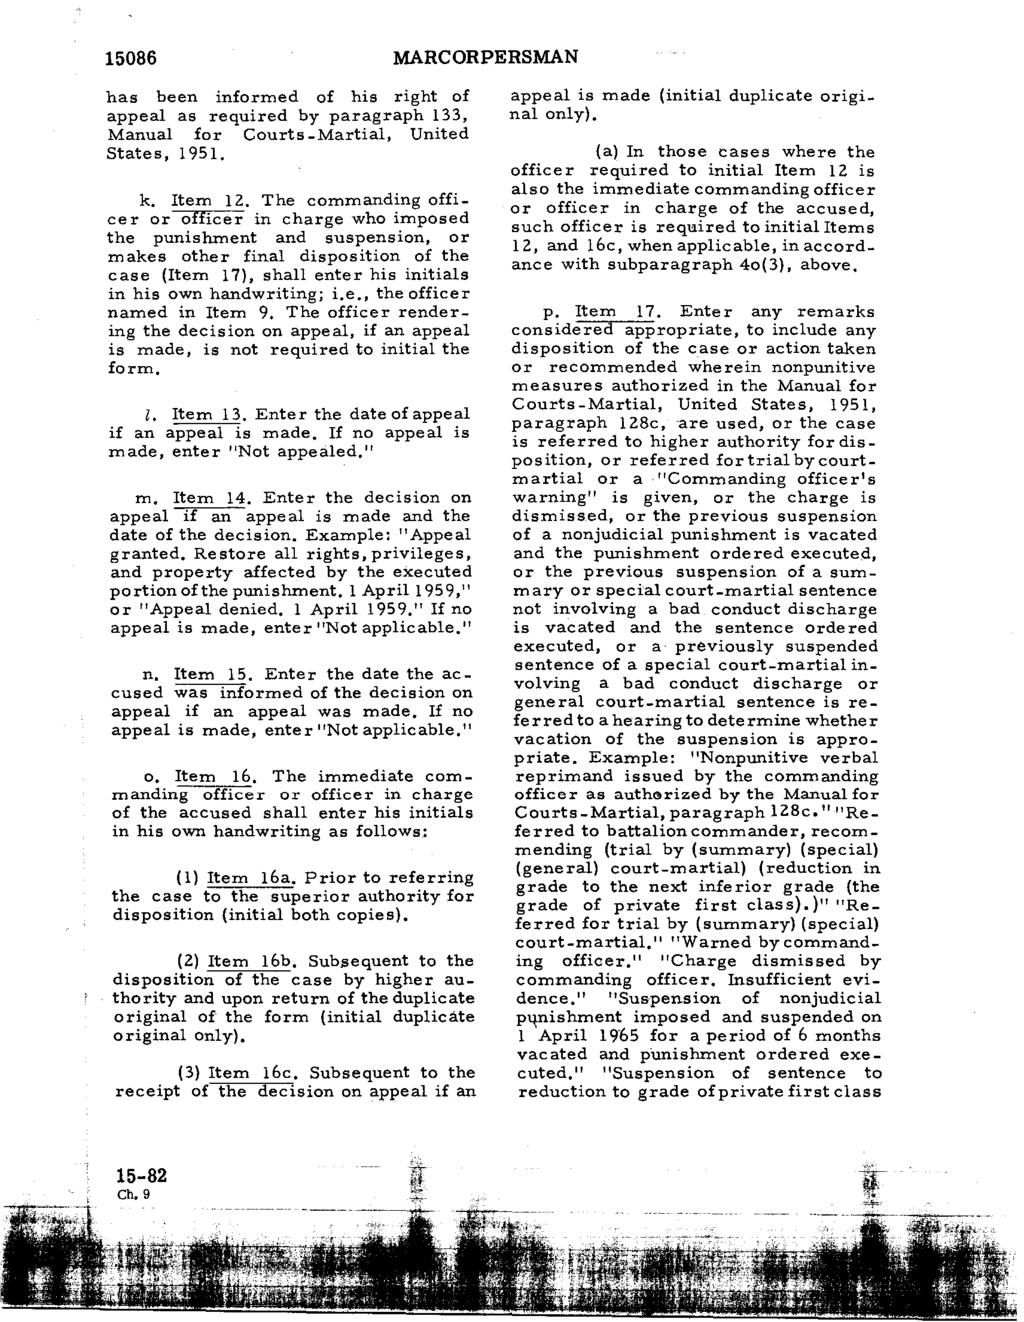 15086 MARCORPERSMAN has been informed of his right of appeal as required by paragraph 133, Manual for Courts -Martial, United States, 1951. k. Item 12.